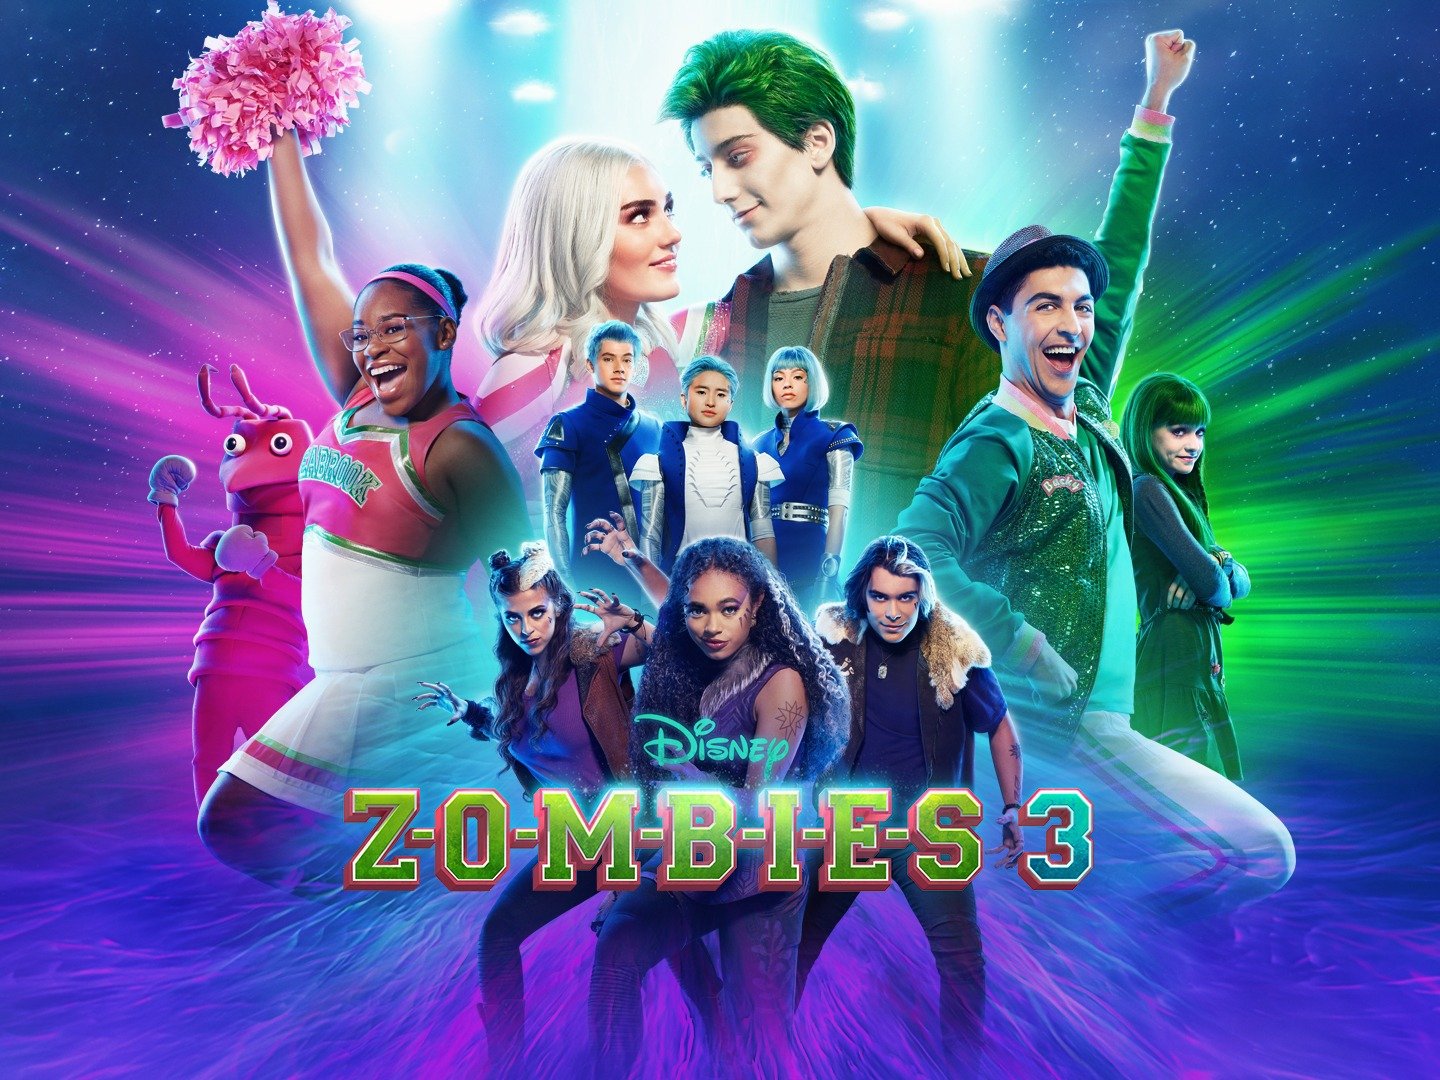 Zombies 3: Trailer 1 - Trailers & Videos - Rotten Tomatoes